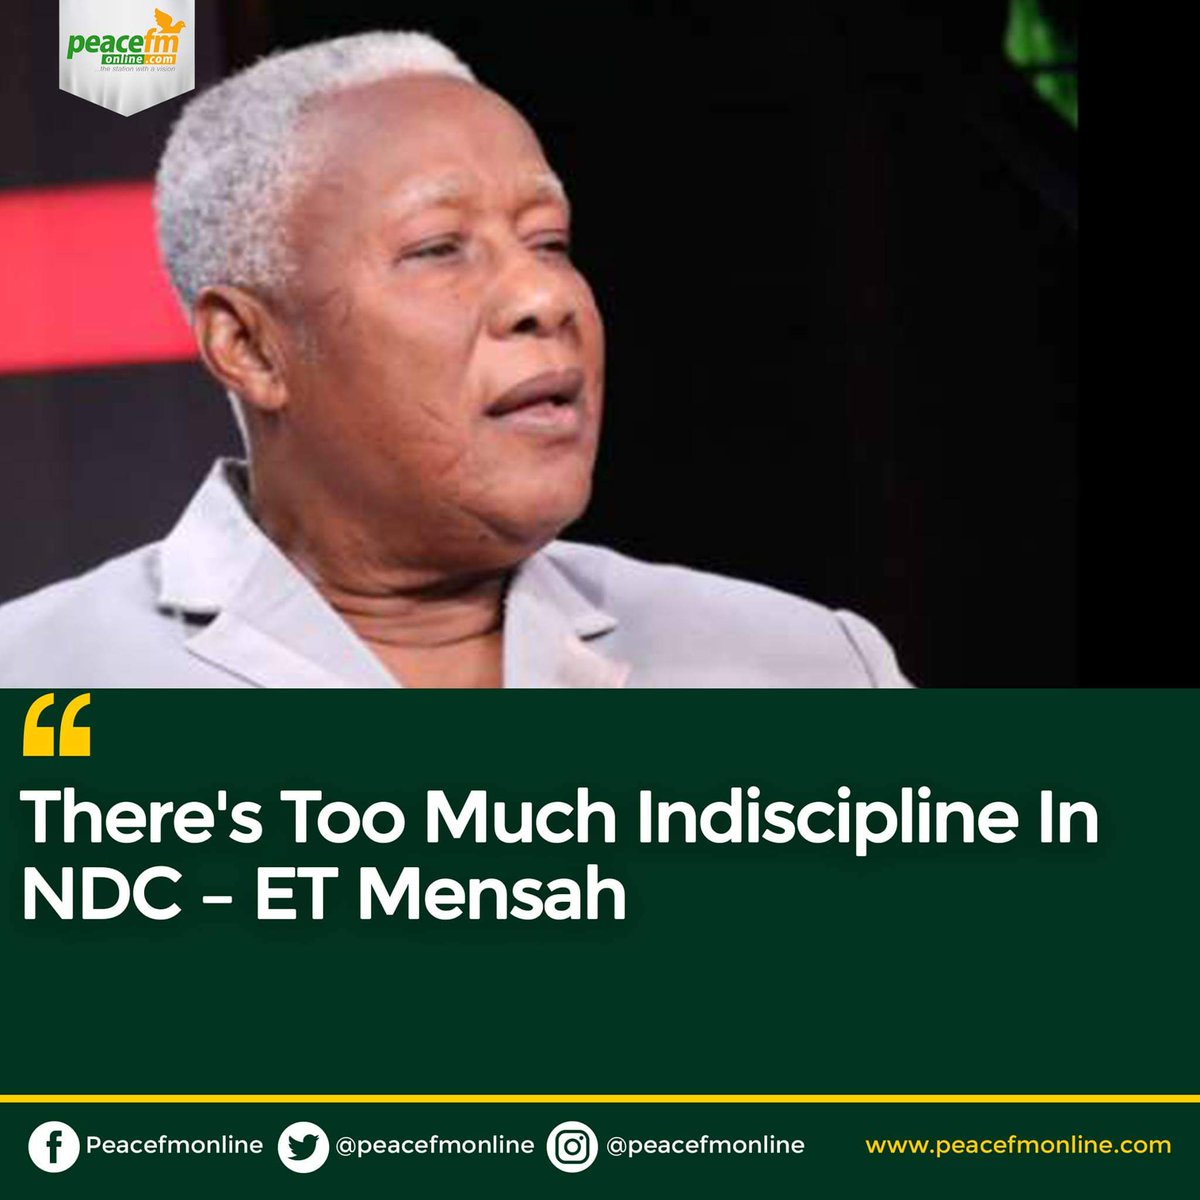 There's too much indiscipline in the NDC -ET Mensah